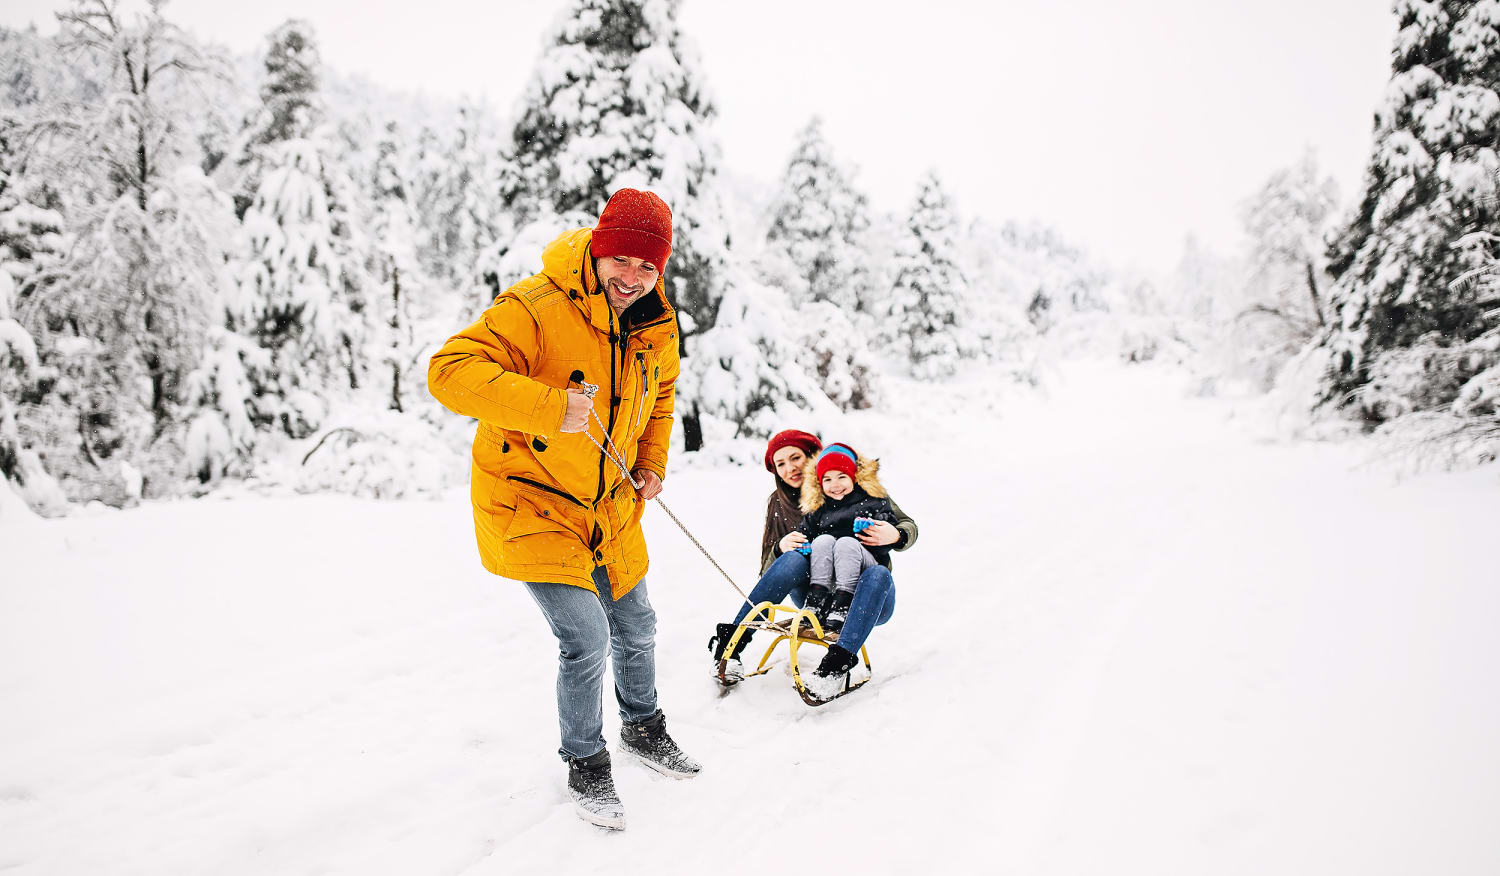 70 winter activities for kids and families to enjoy all season long